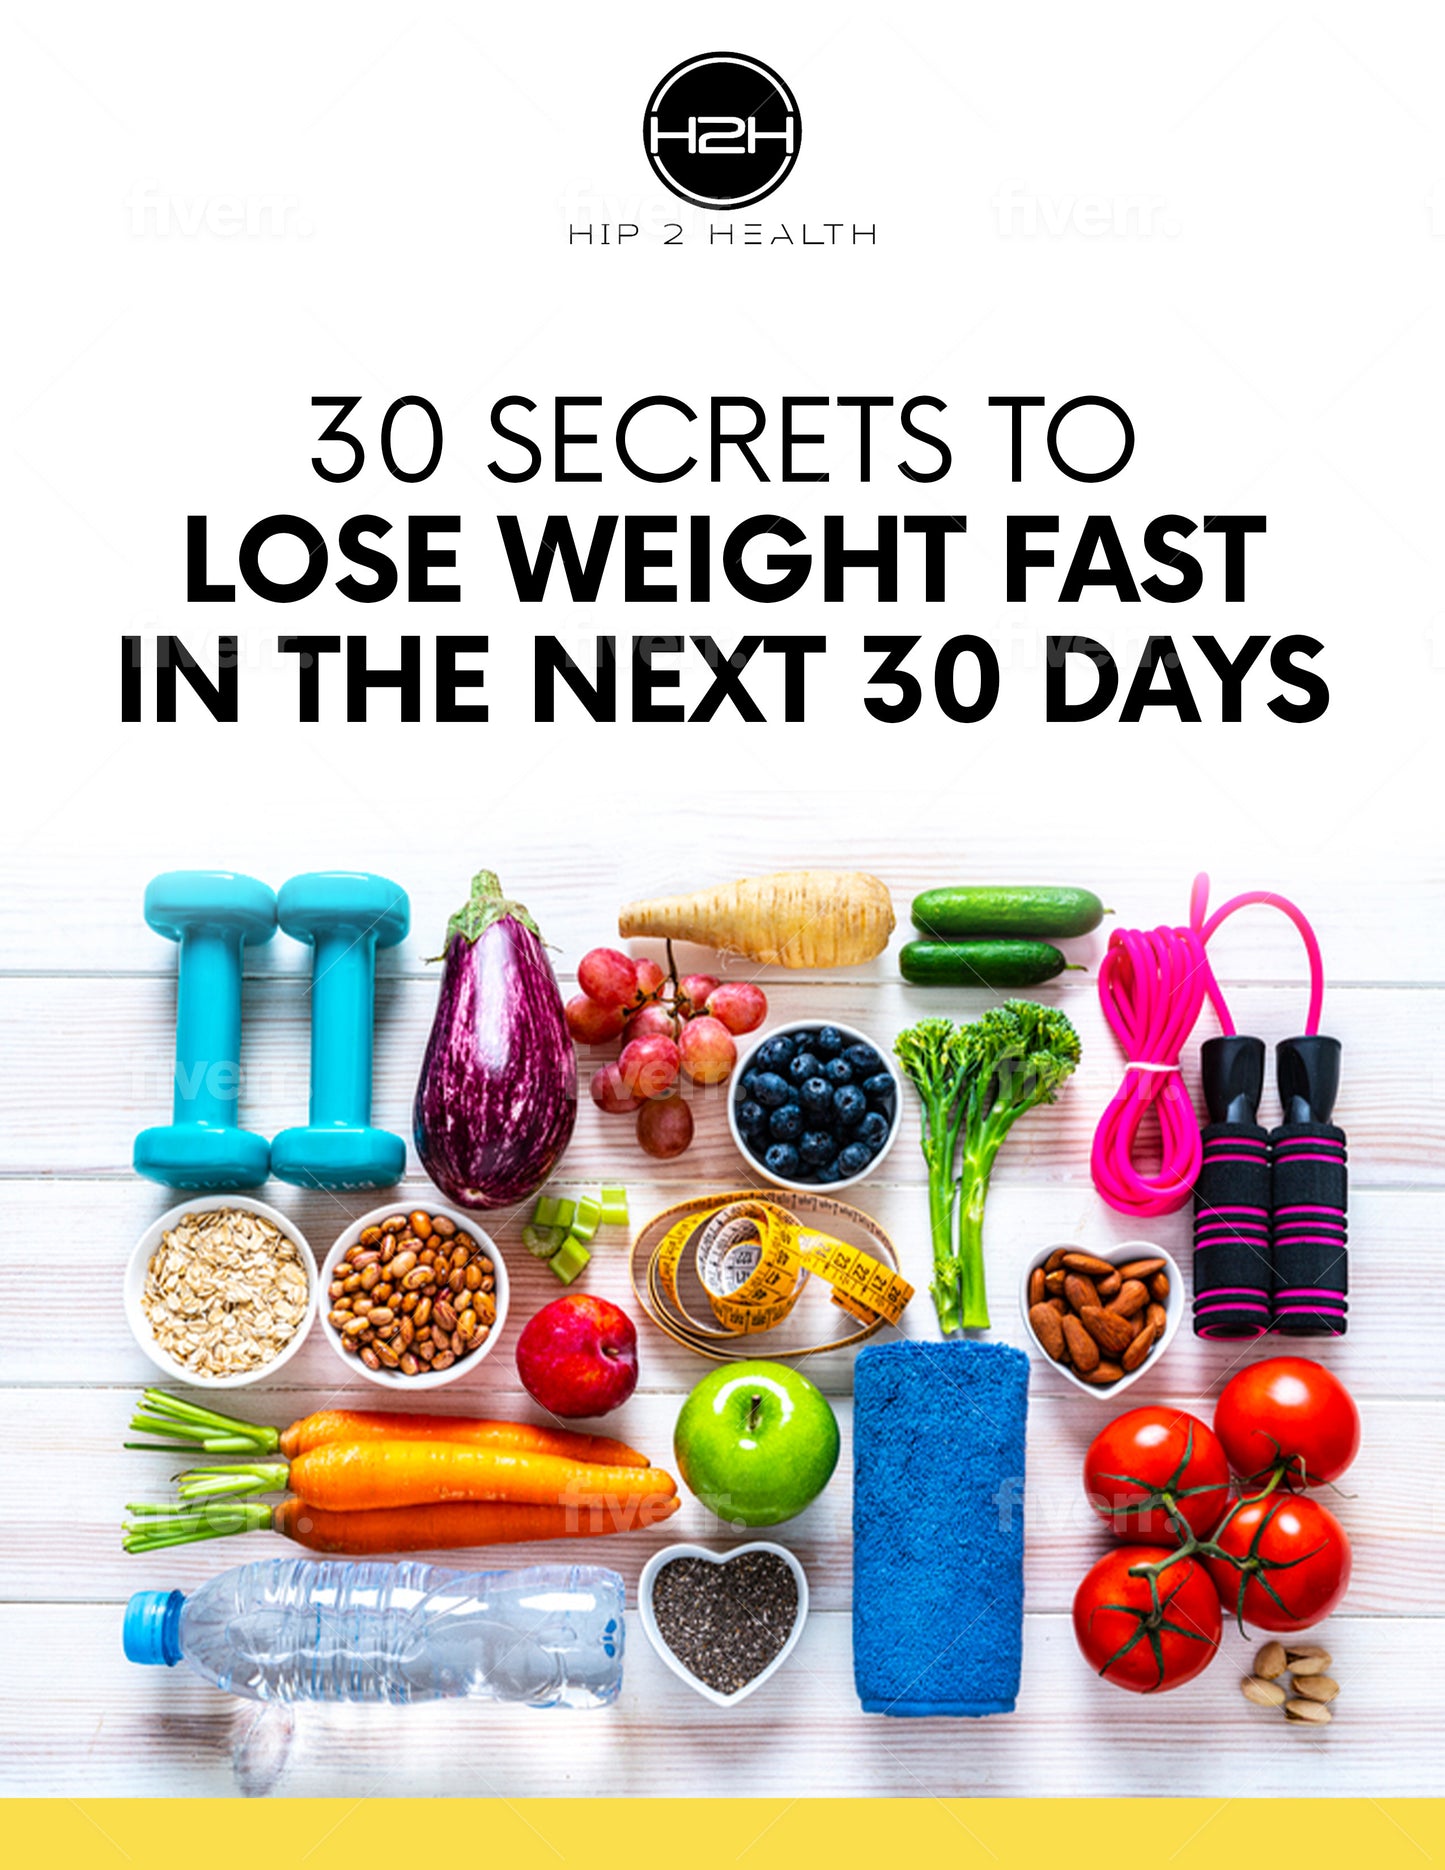 30 SECRETS To Lose Weight Fast In 30 Days EBOOK